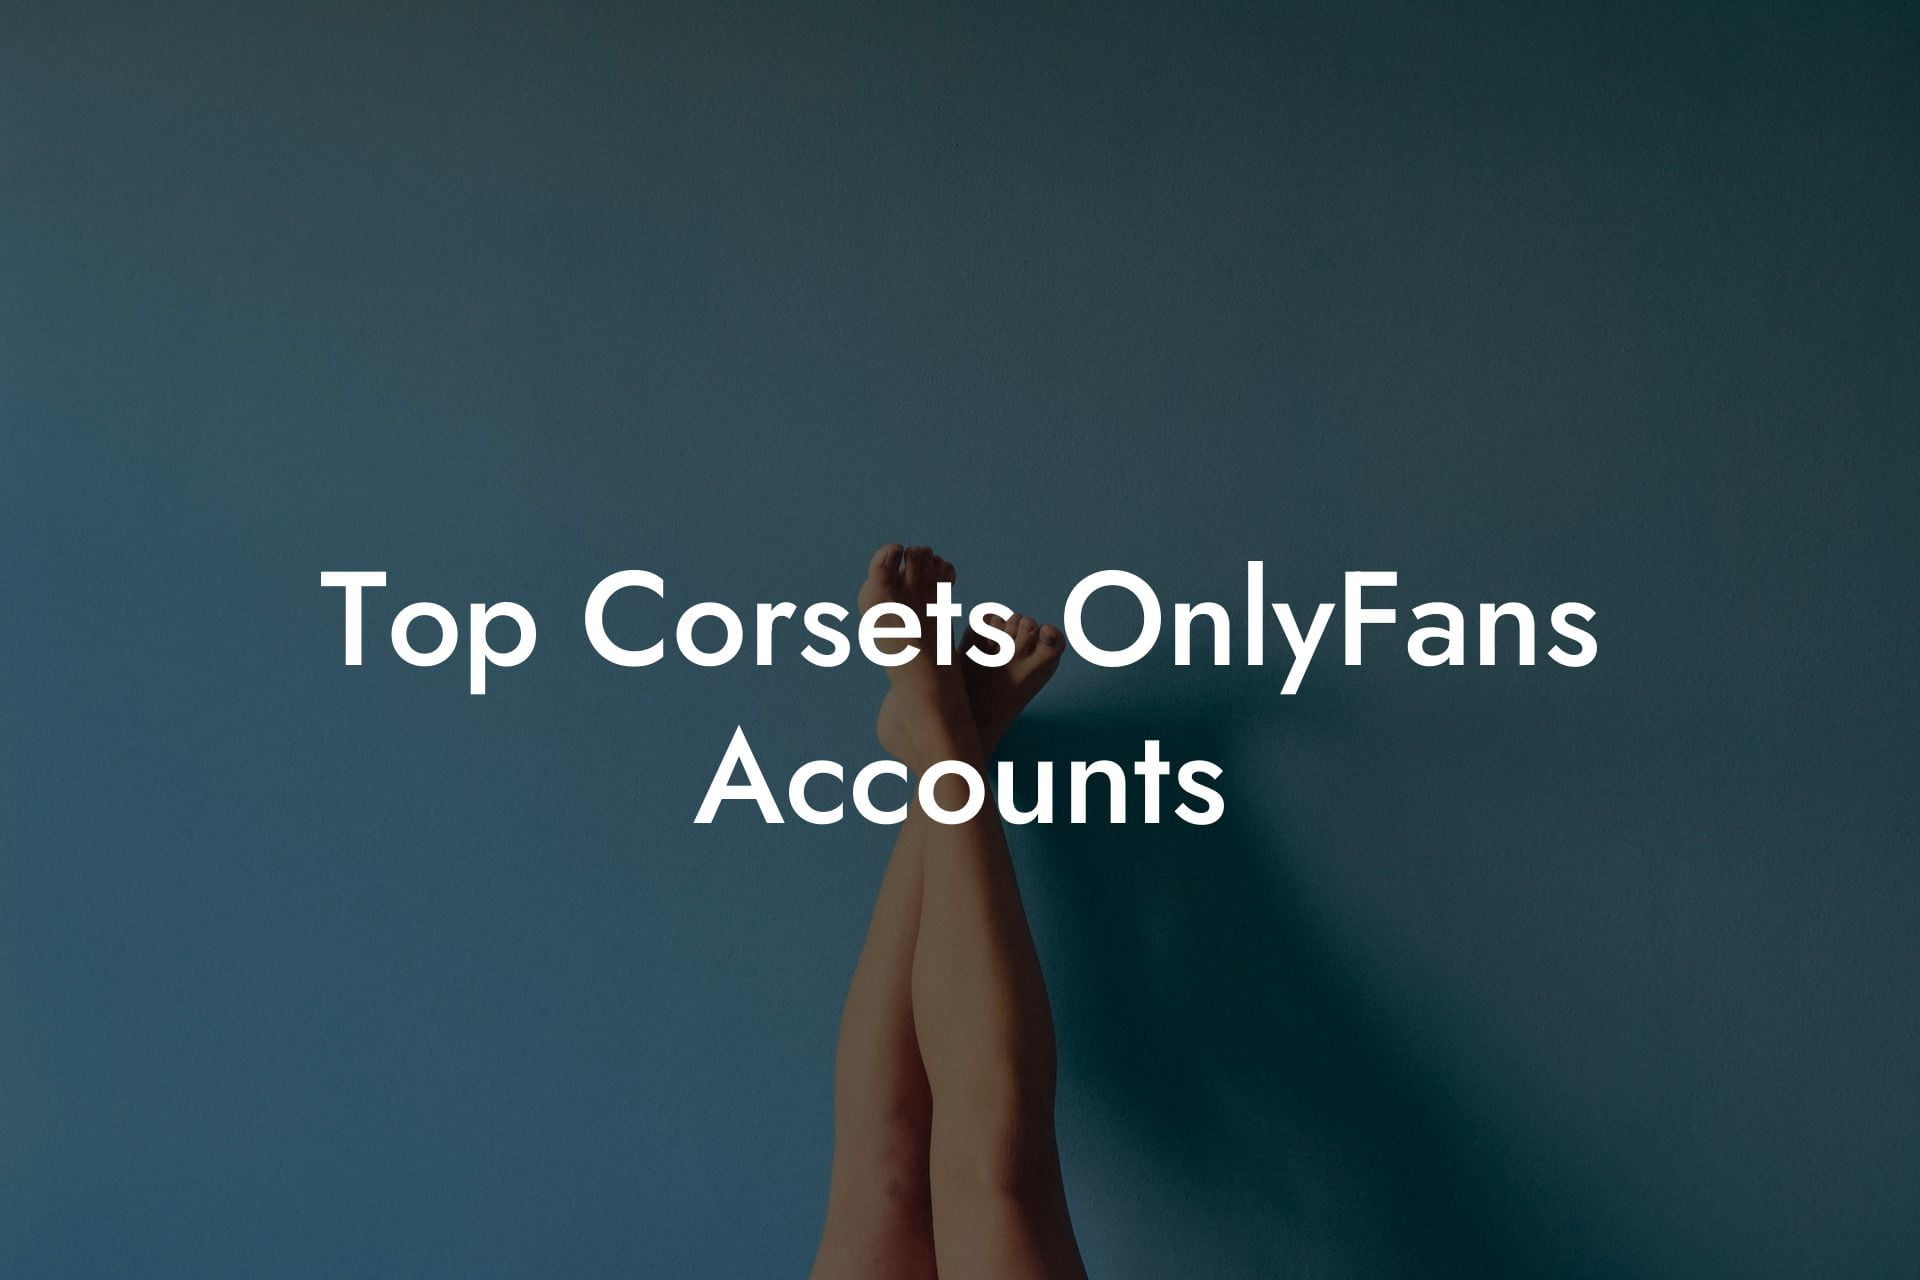 Top Corsets OnlyFans Accounts